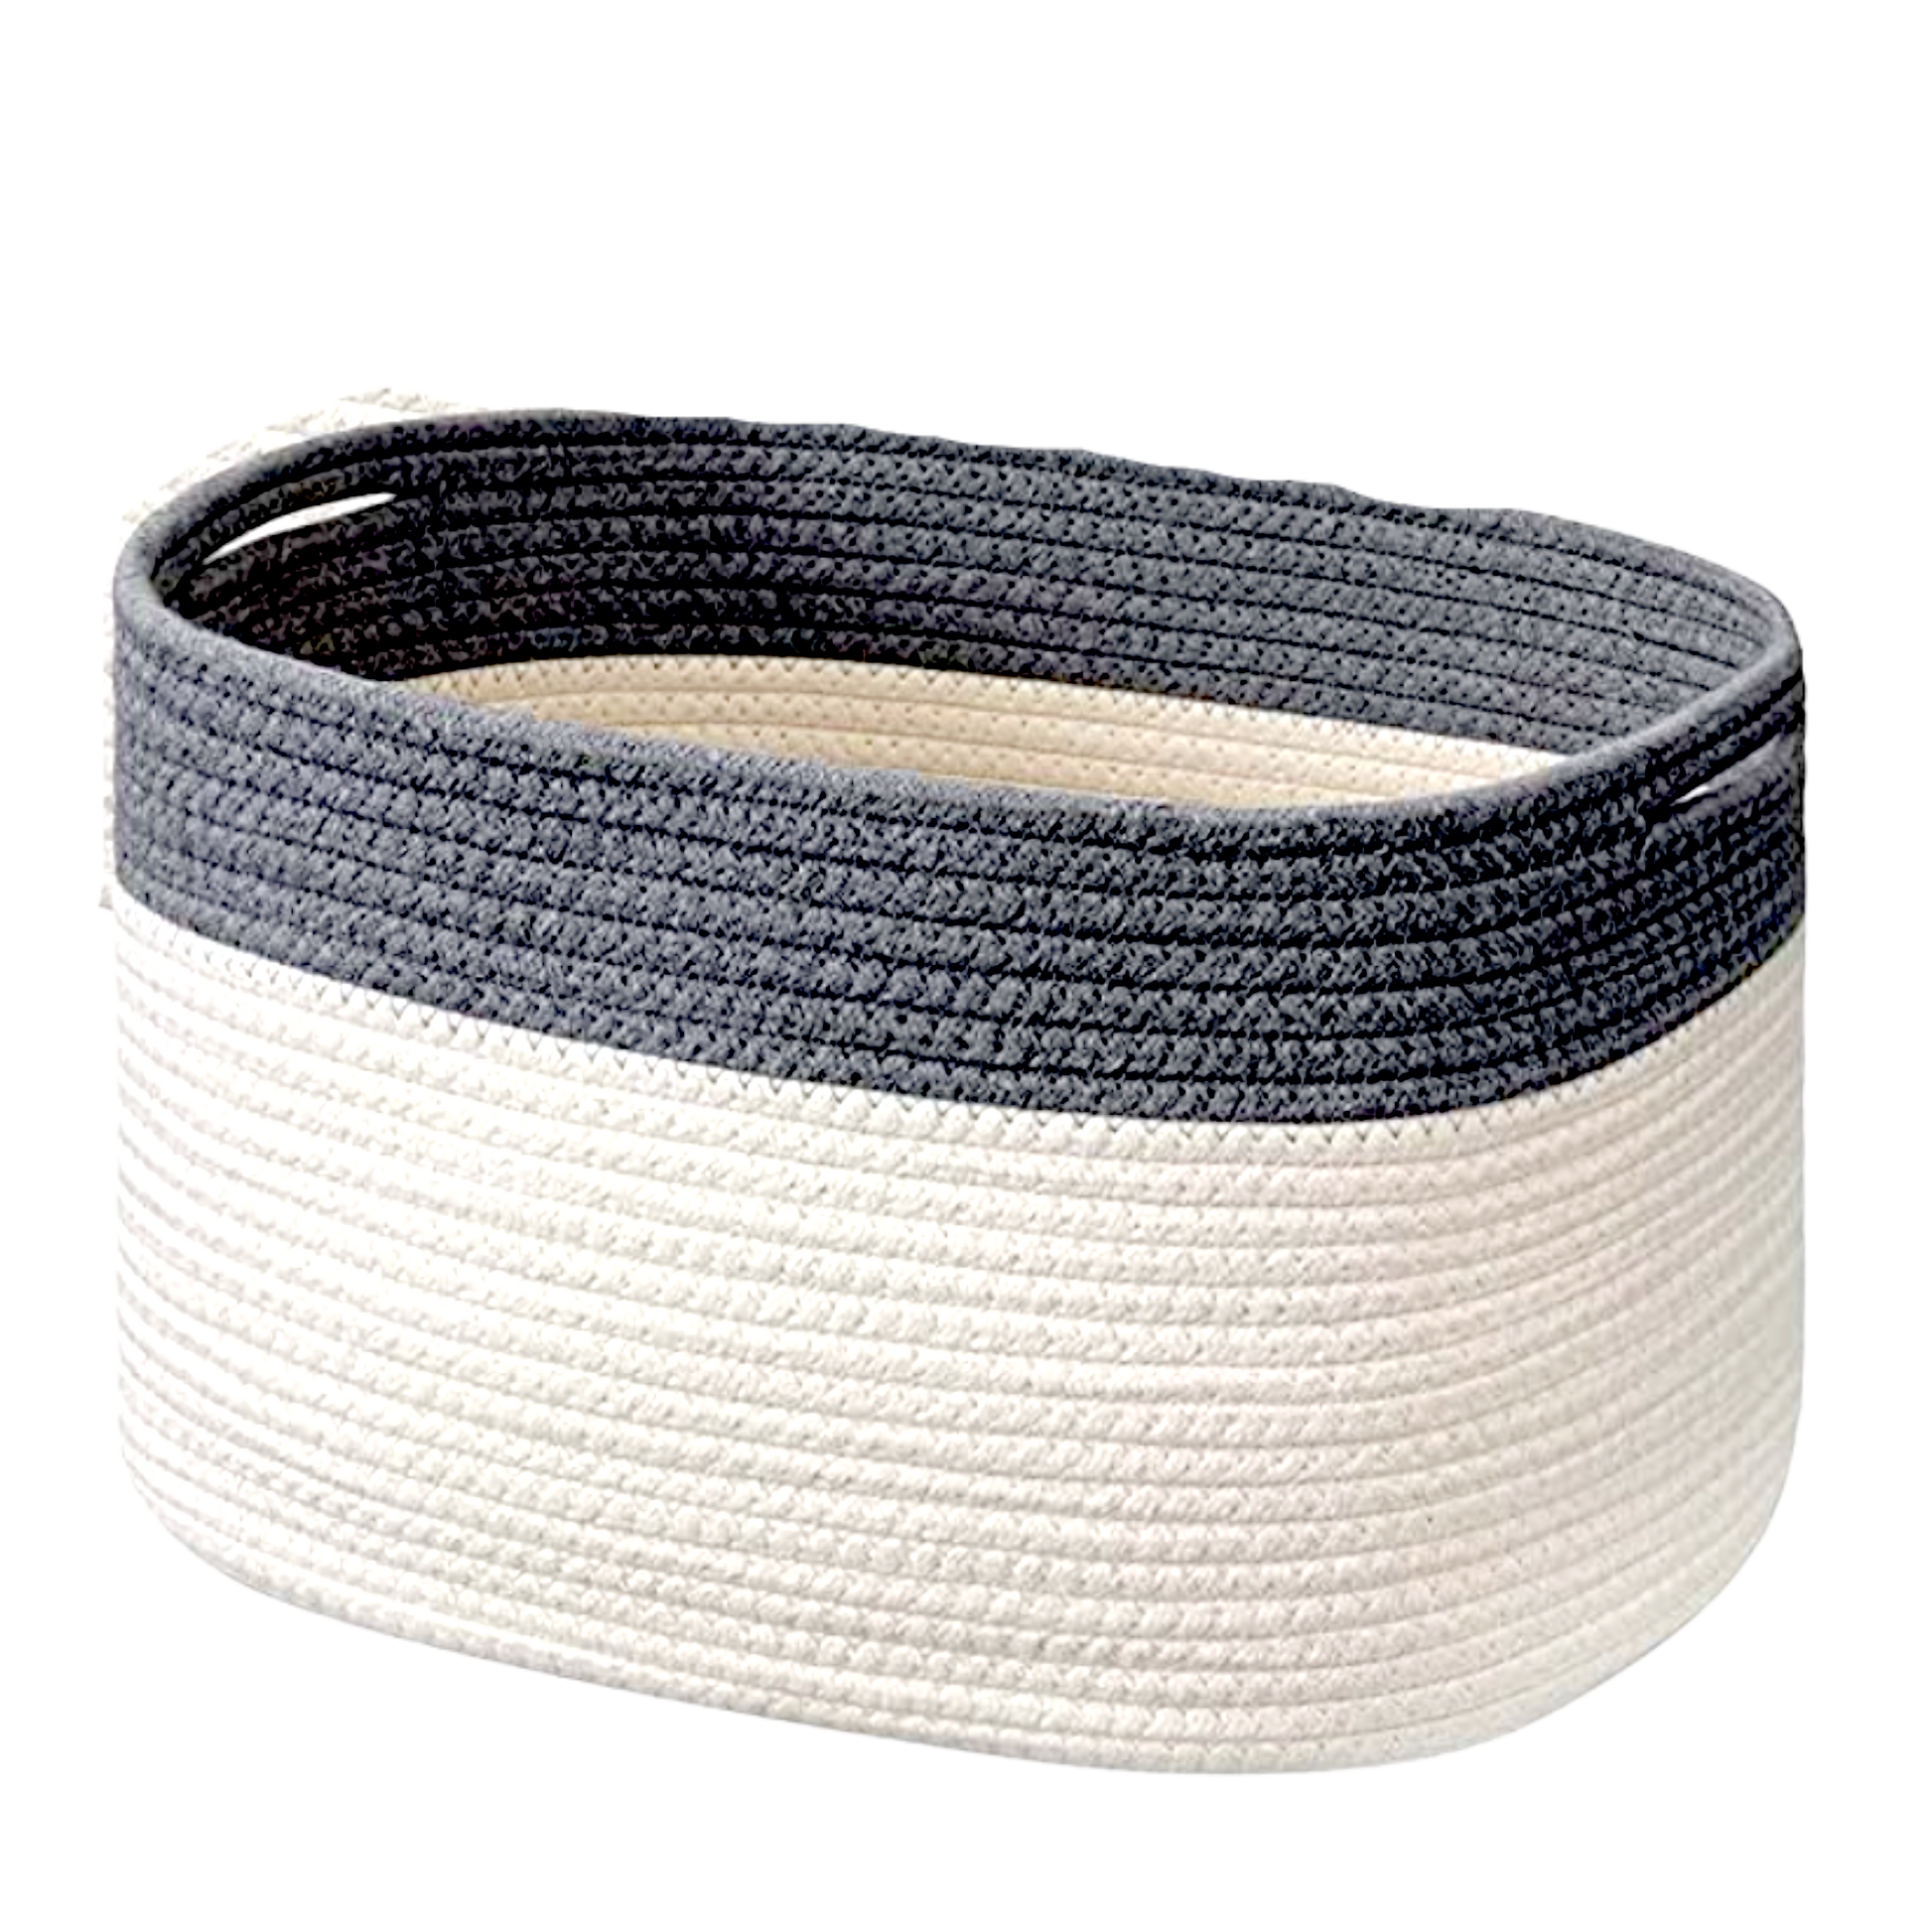 Oval Cotton Rope Basket - Gray and White – Clever Organizing Solutions